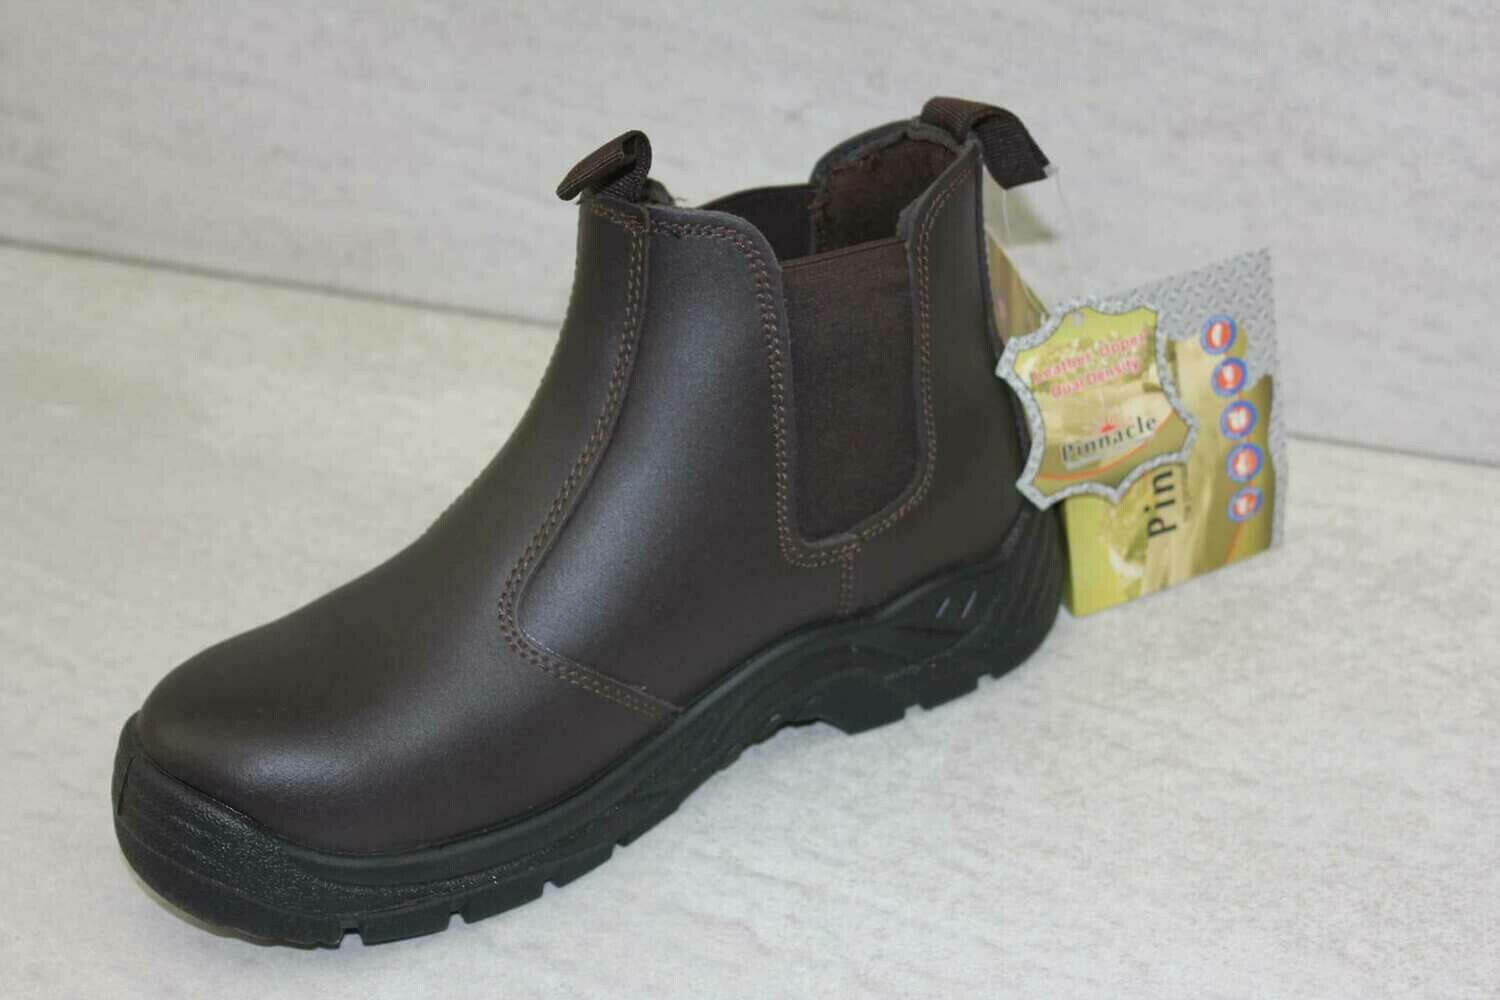 Commander safety boot